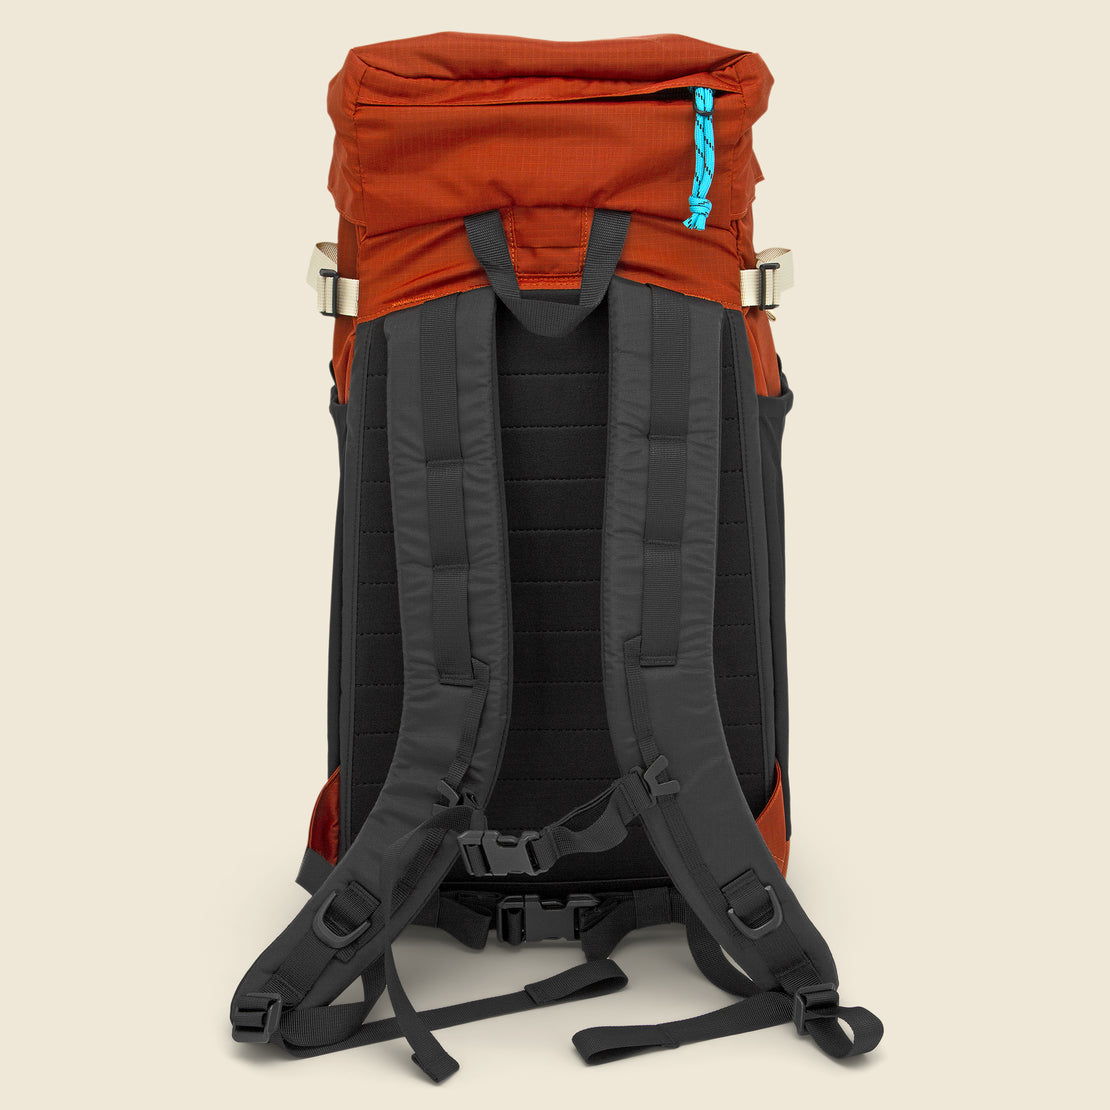 Mountain Pack 16L - Clay/Black - Topo Designs - STAG Provisions - Accessories - Bags / Luggage